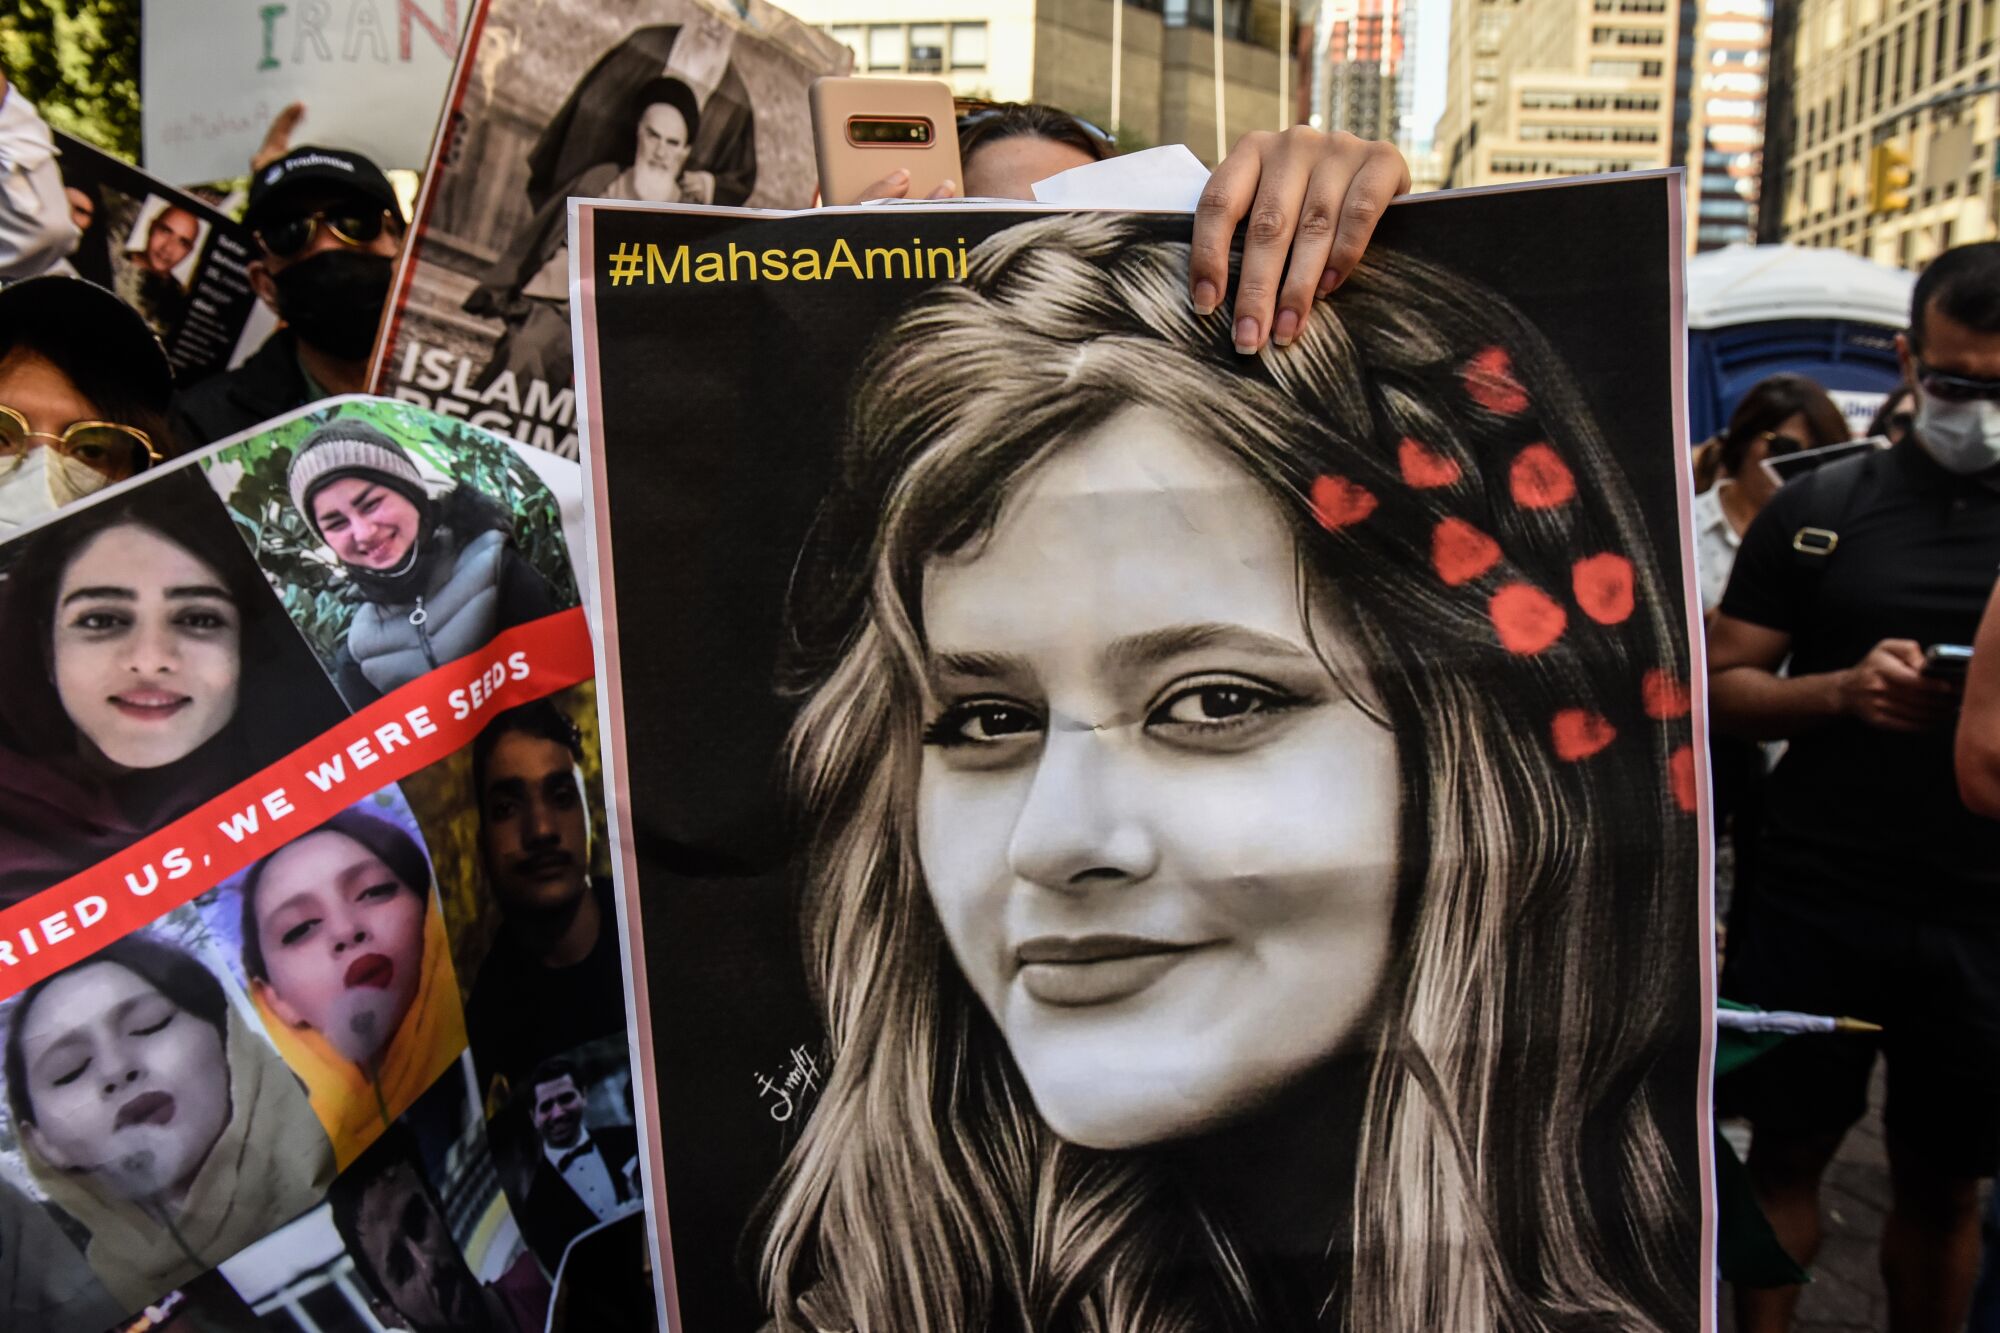 Posters held by protesters show 22-year-old Iranian woman Mahsa Amini